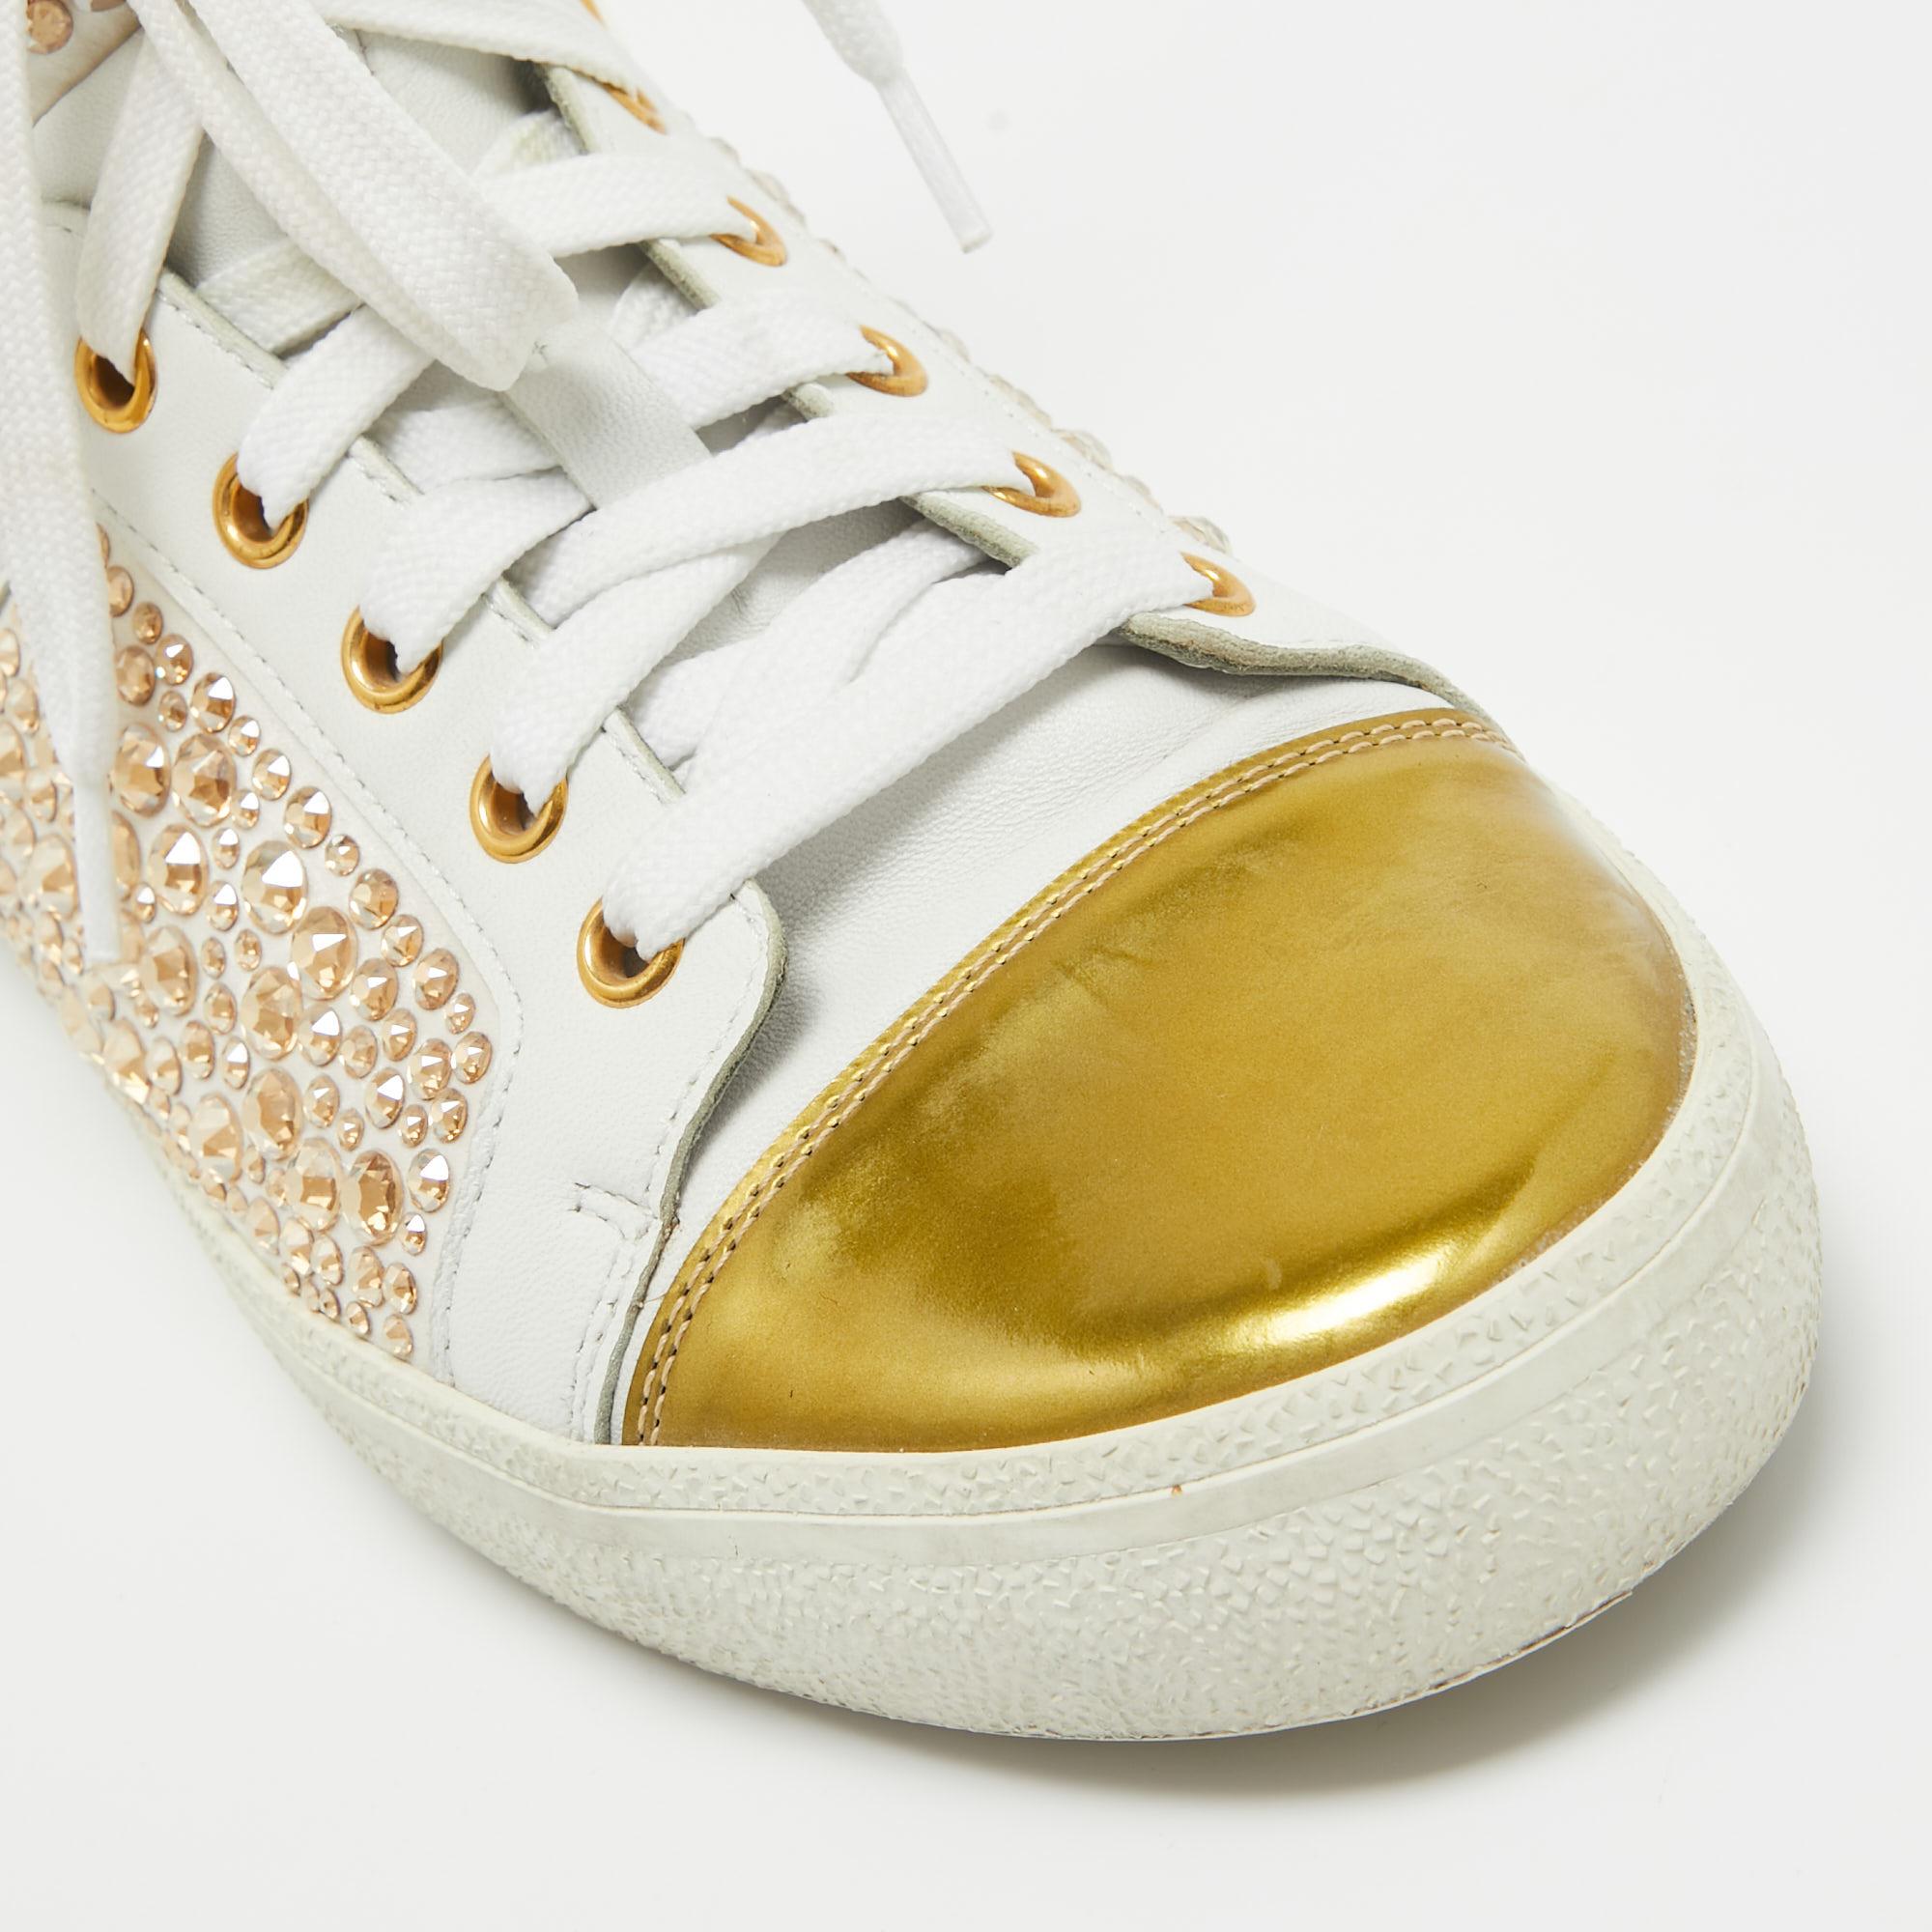 Gina White/Gold Leather Strass Embellished High Top Sneakers Size 39 In Good Condition For Sale In Dubai, Al Qouz 2